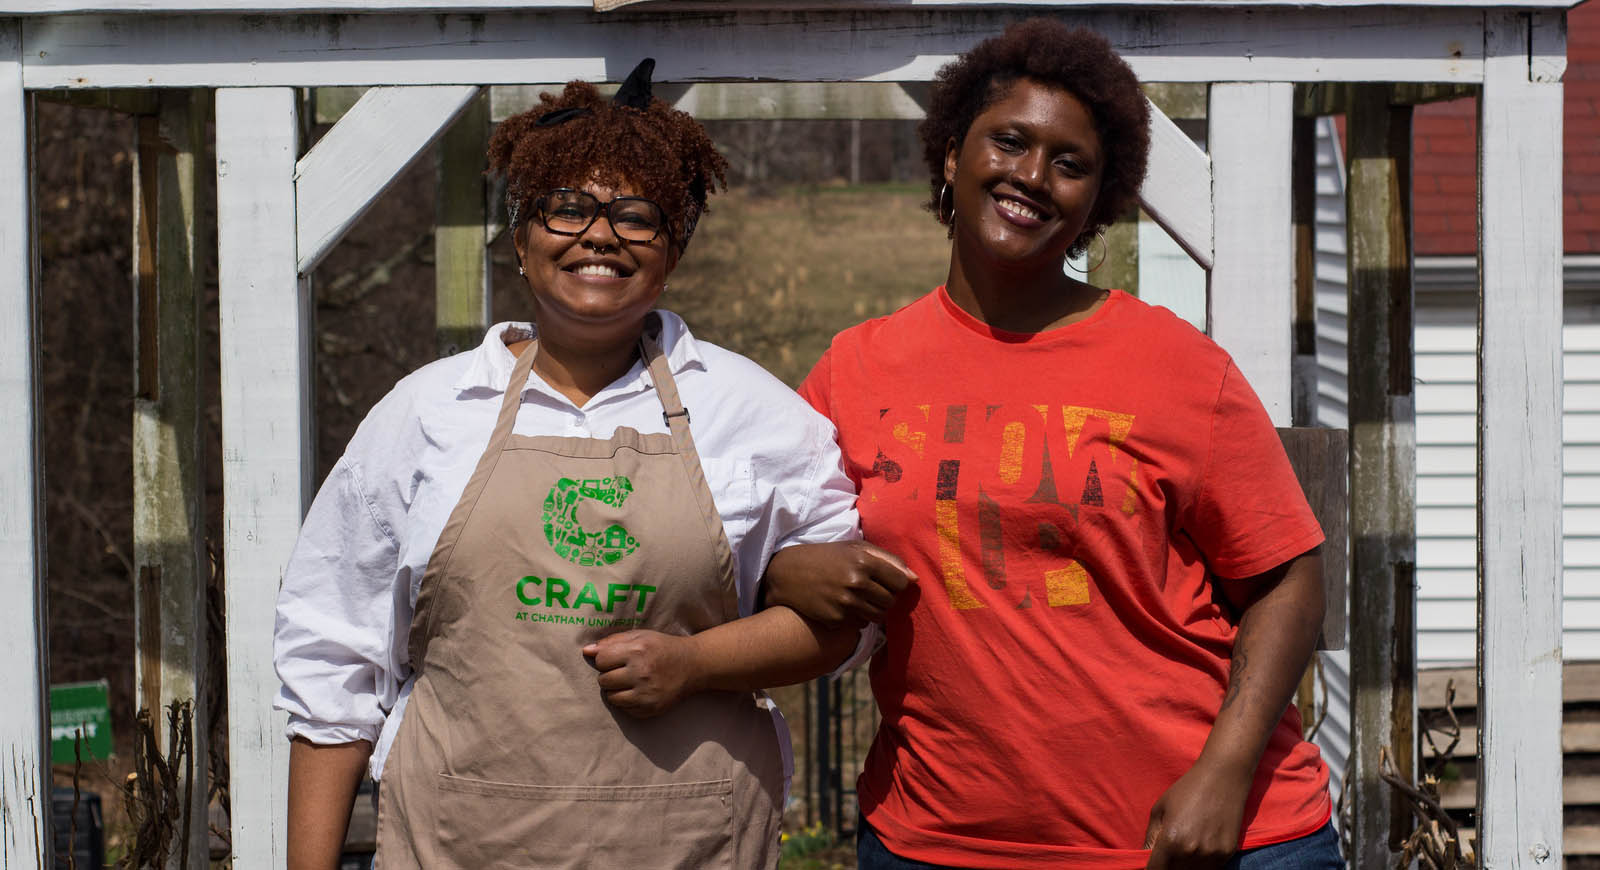 Photo fo two smiling women linking arms. One is wearing an apron with the CRAFT logo.